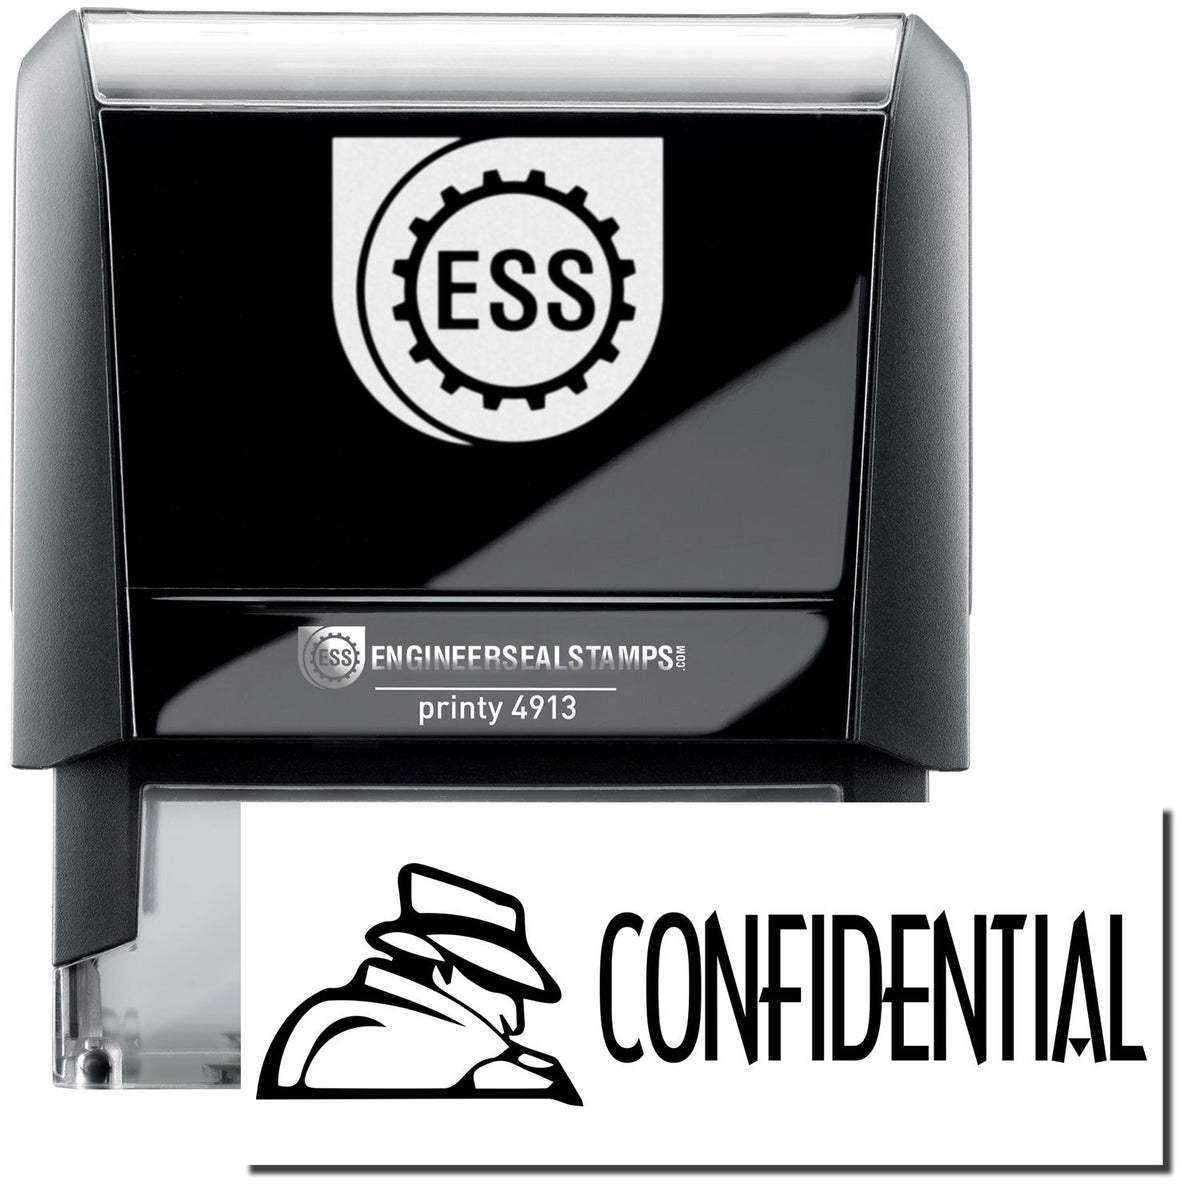 A self-inking stamp with a stamped image showing how the text &quot;CONFIDENTIAL&quot; in a large font with a logo is displayed by it after stamping.